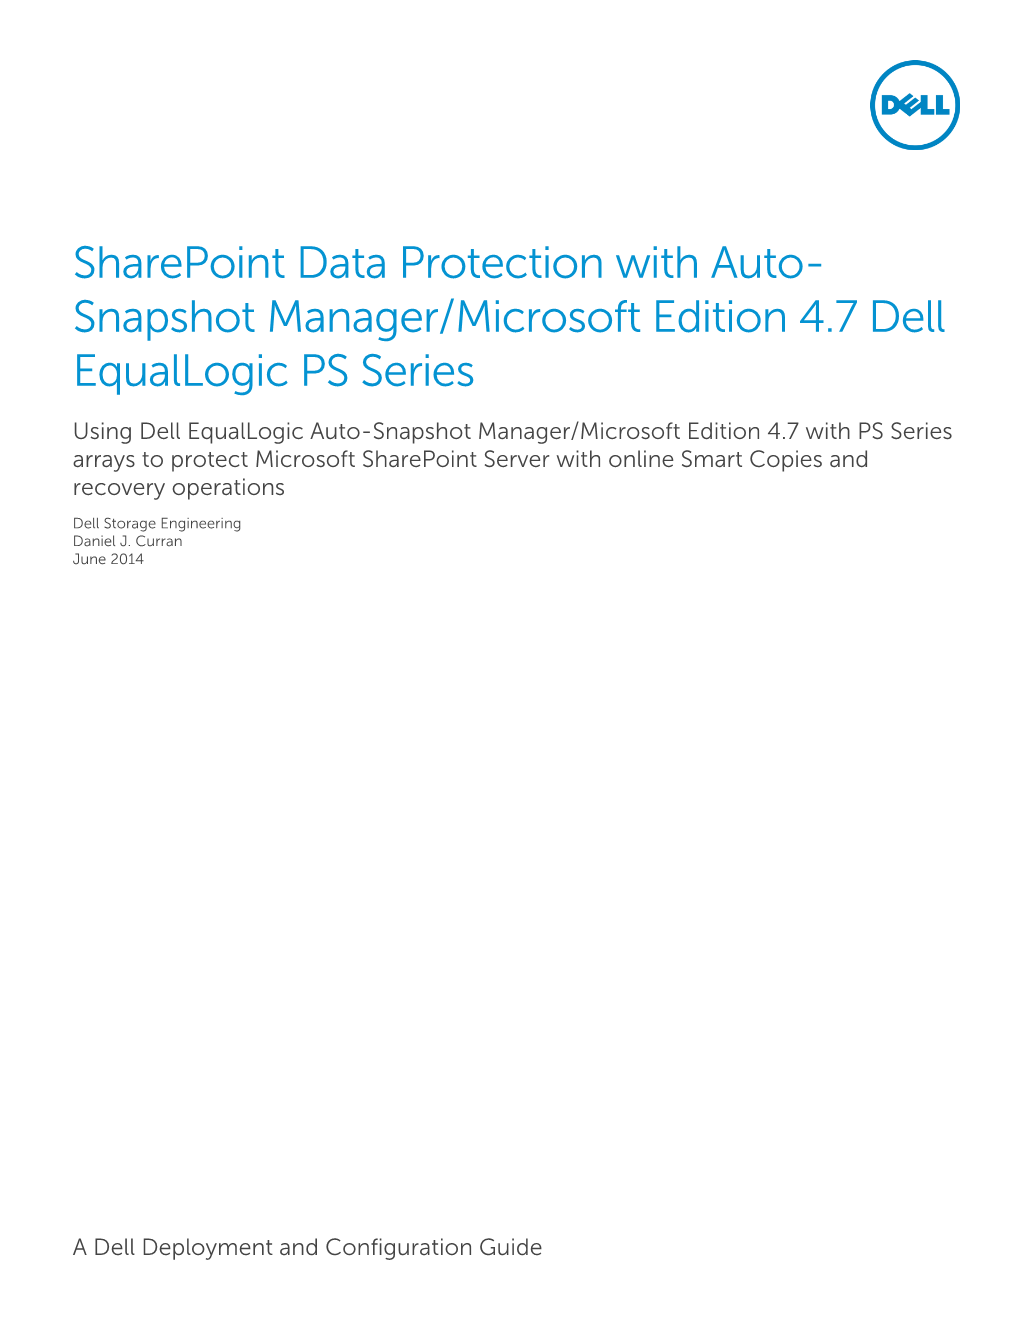 Sharepoint Data Protection with Auto-Snapshot Manager Microsoft Edition 4.7 Dell Equallogic PS Series